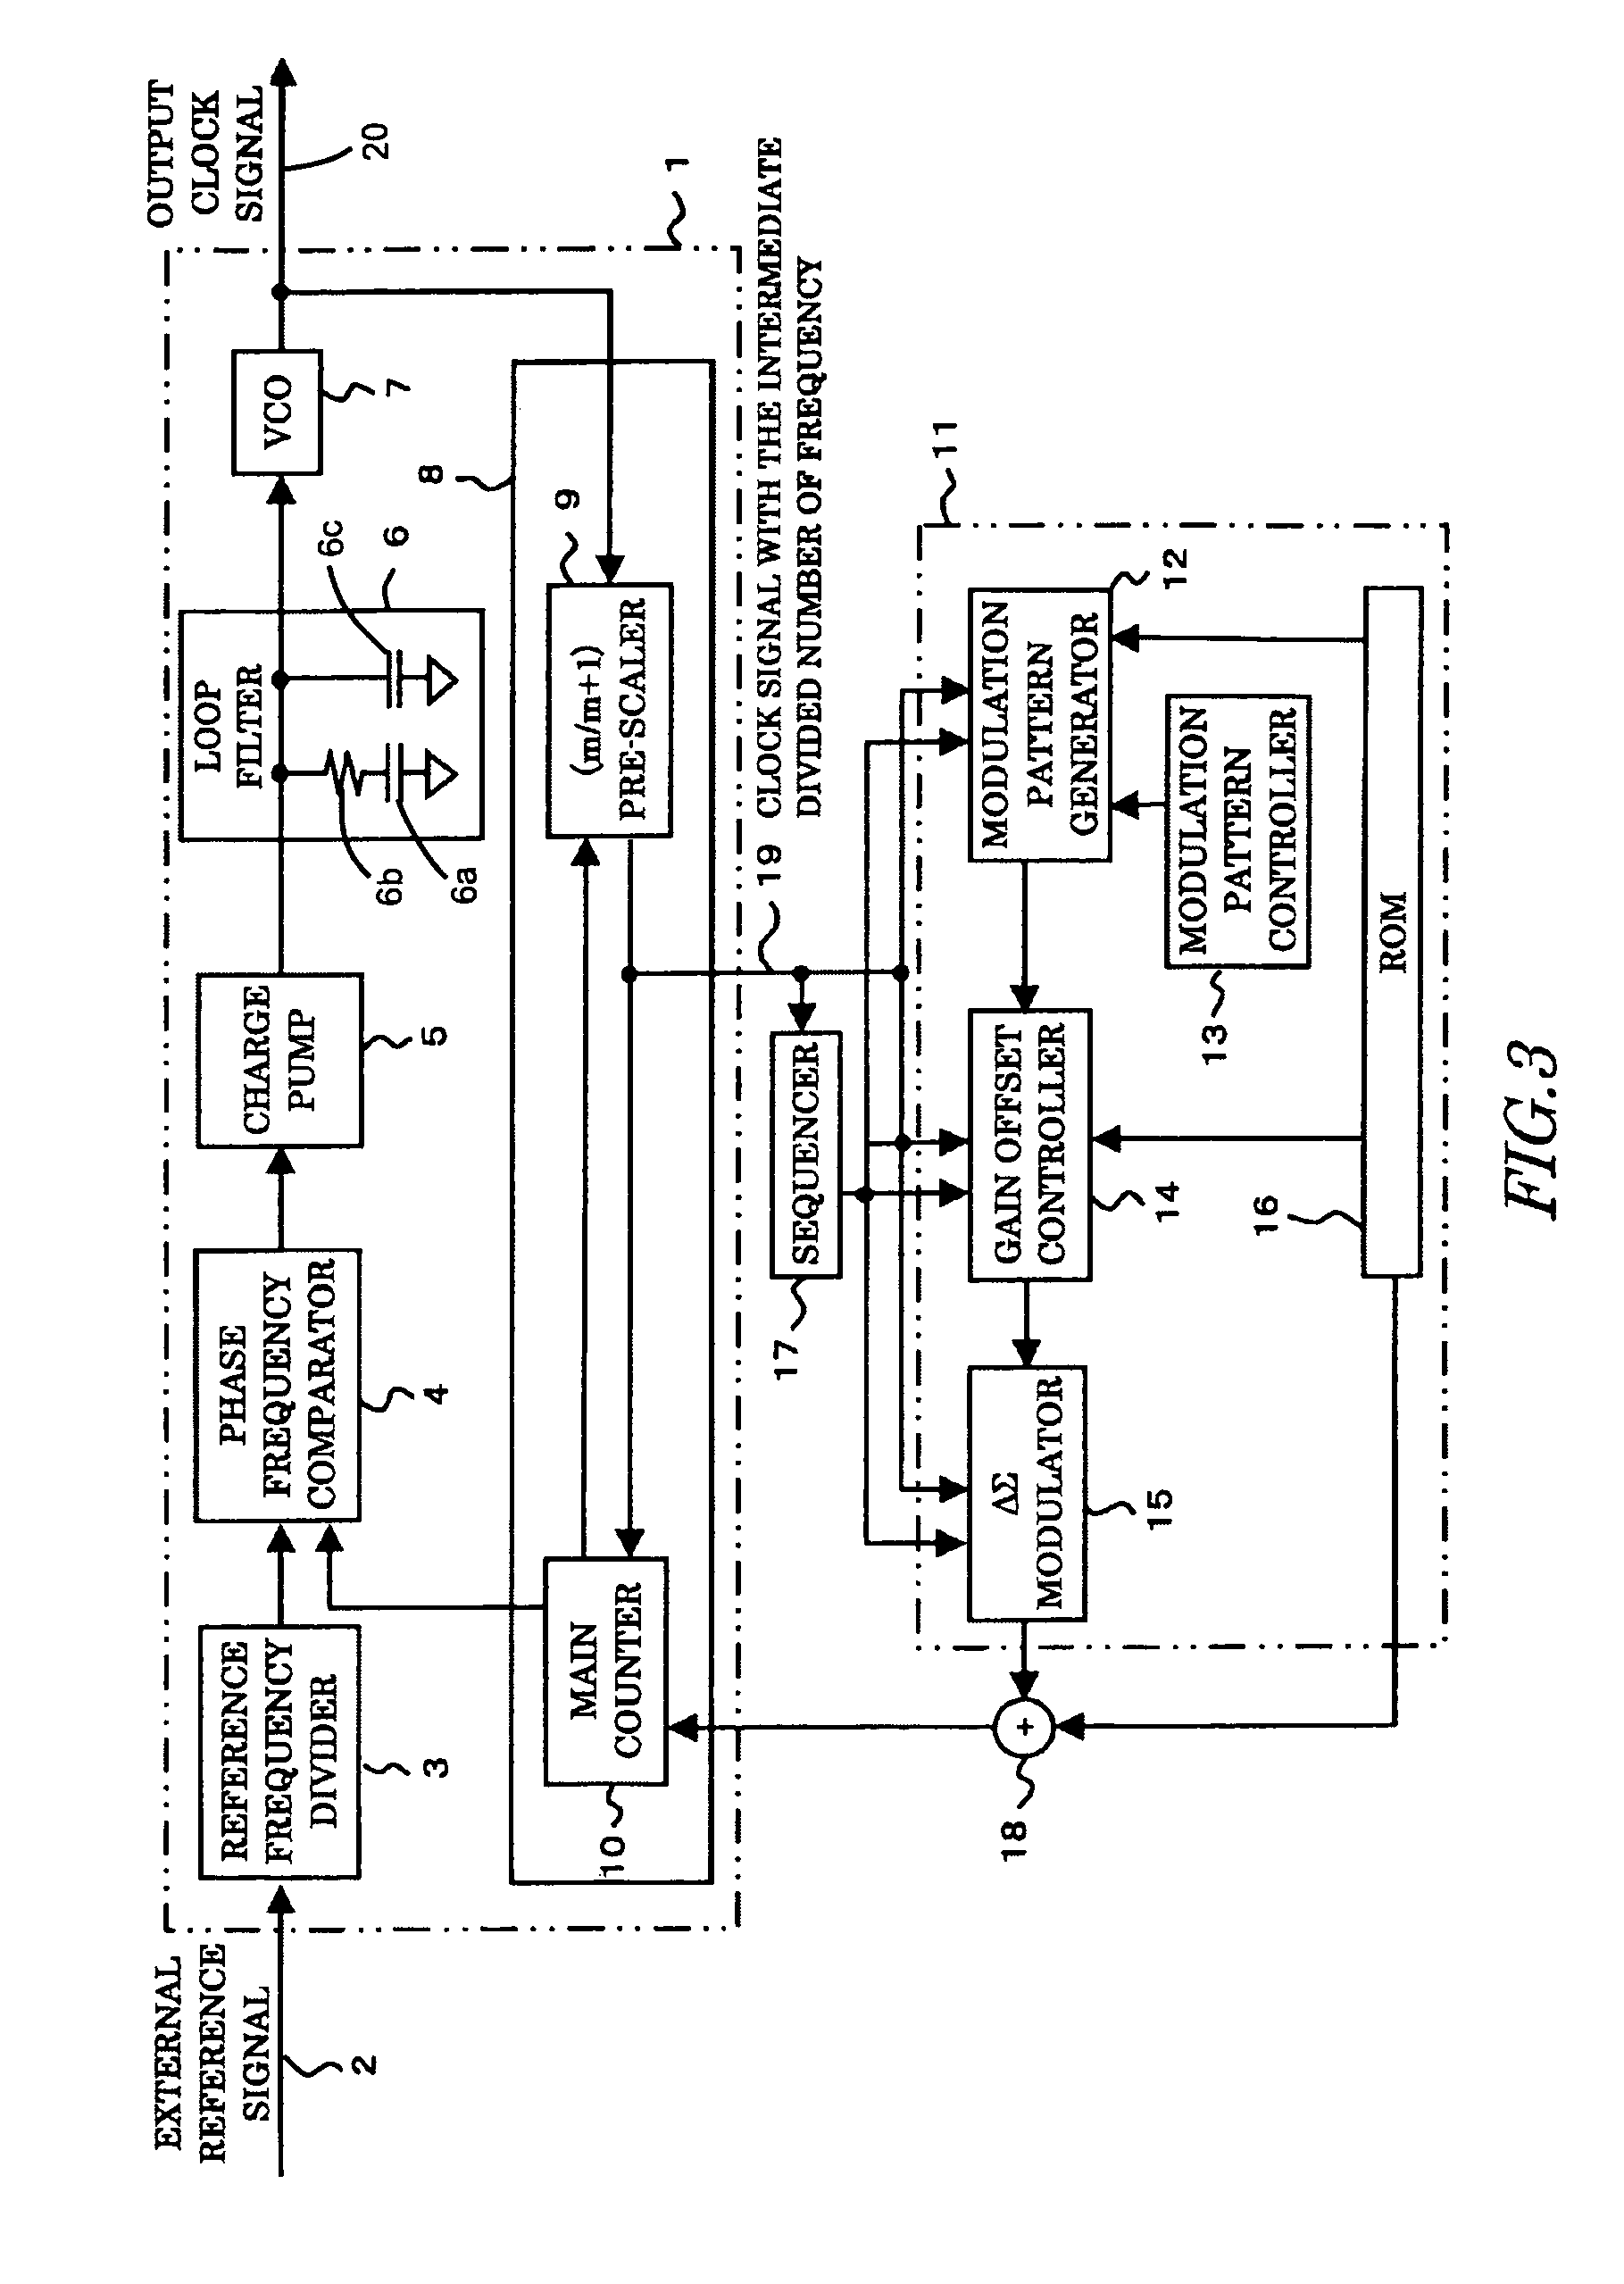 Spread spectrum type clock generation circuit for improving frequency modulation efficiency